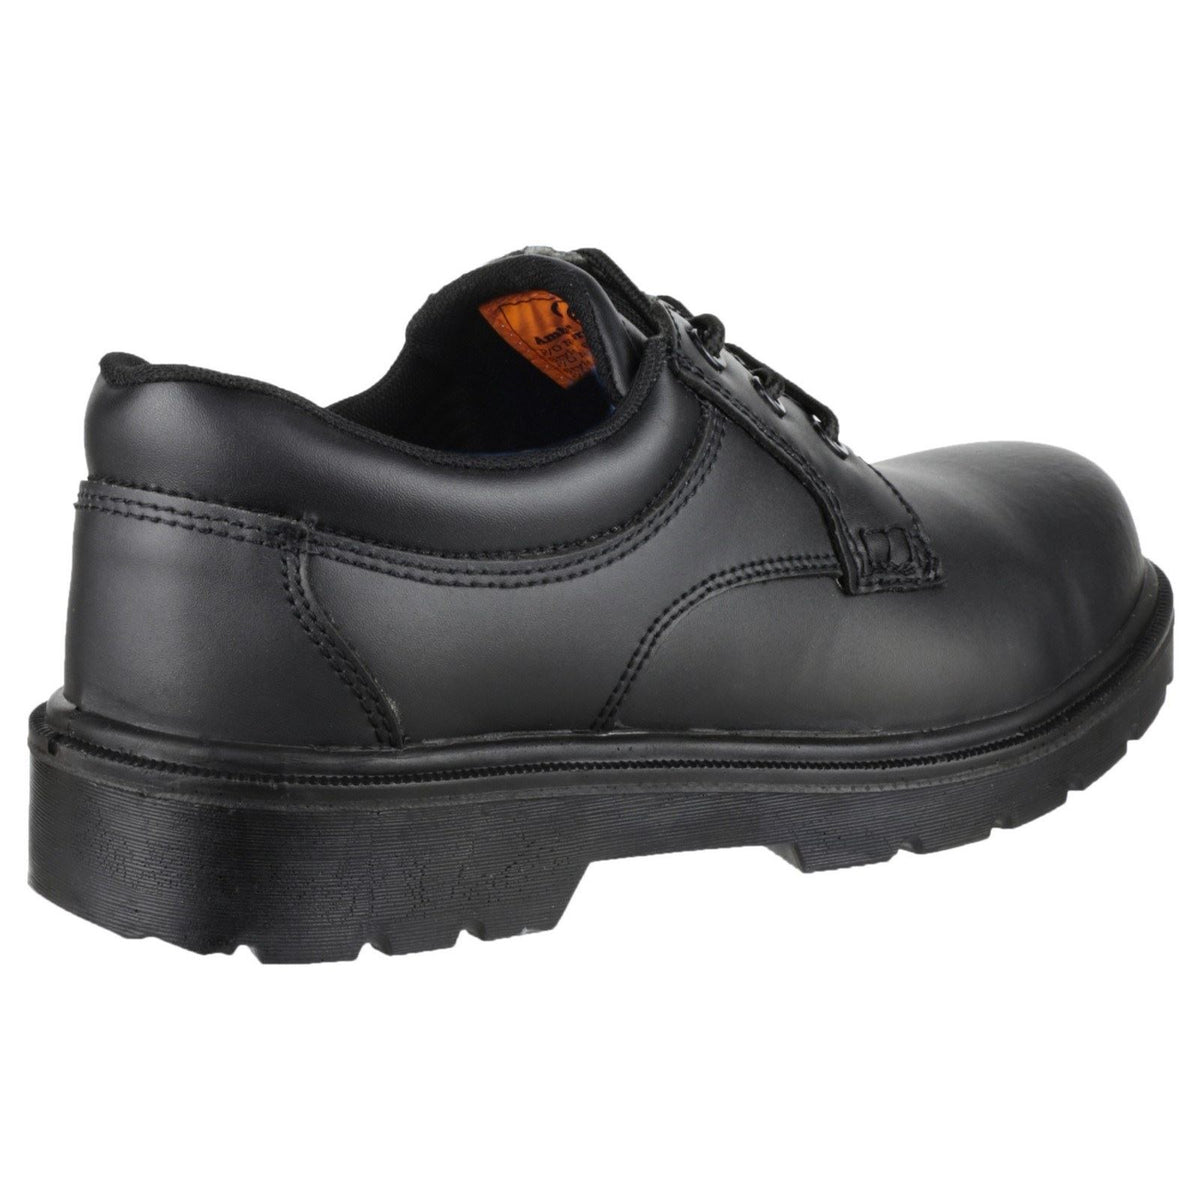 Amblers Safety FS38C Metal Free Composite Gibson Lace Safety Shoes